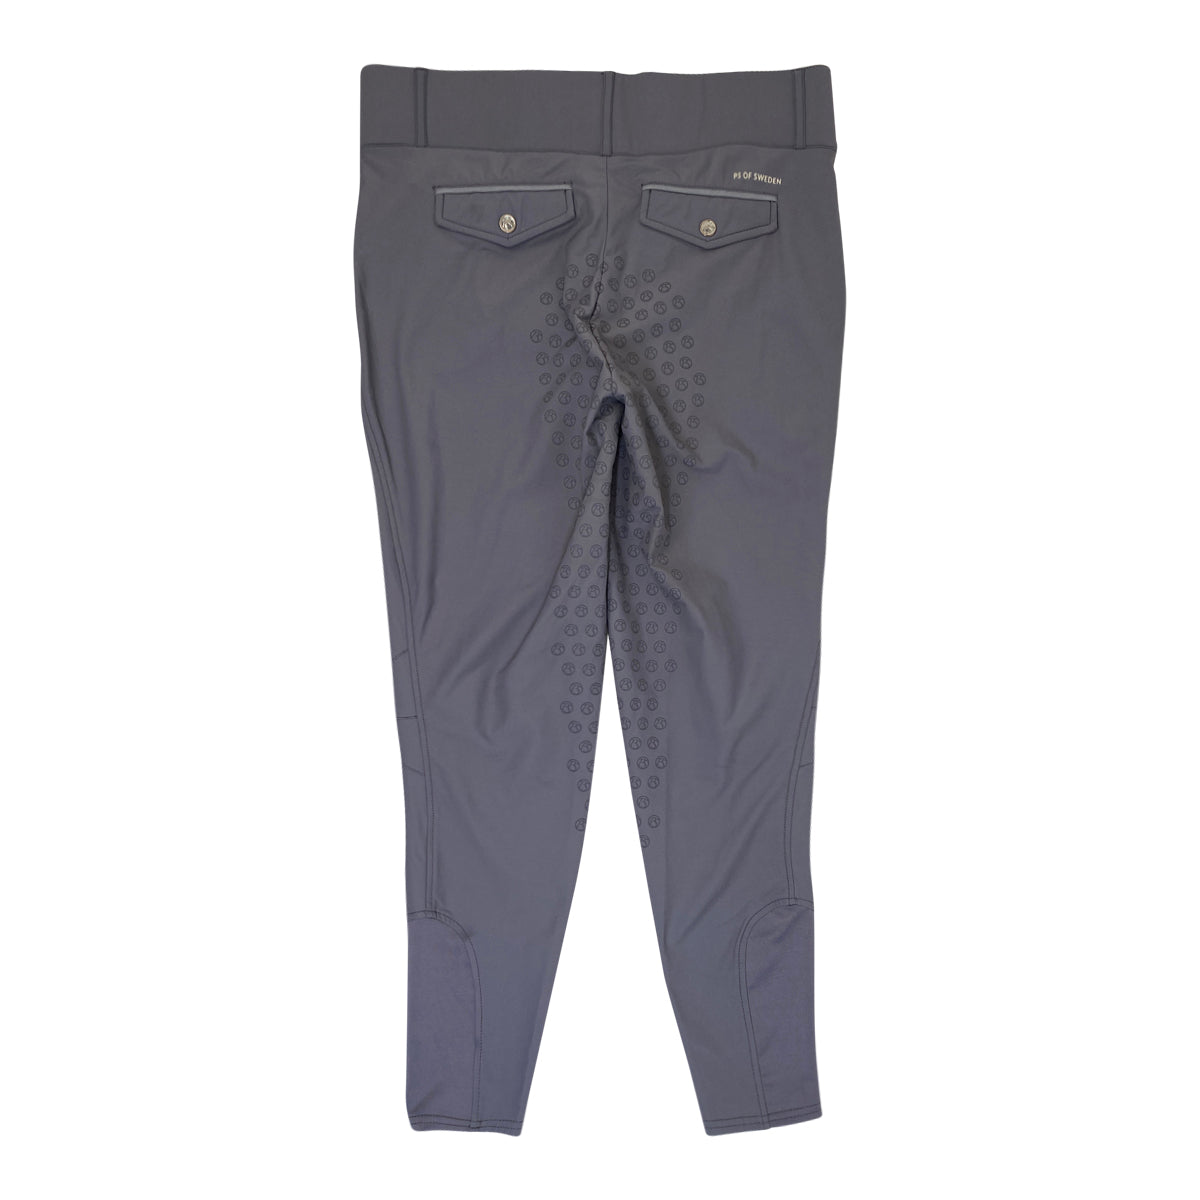 PS of Sweden Full Seat Breeches in Misty Grey